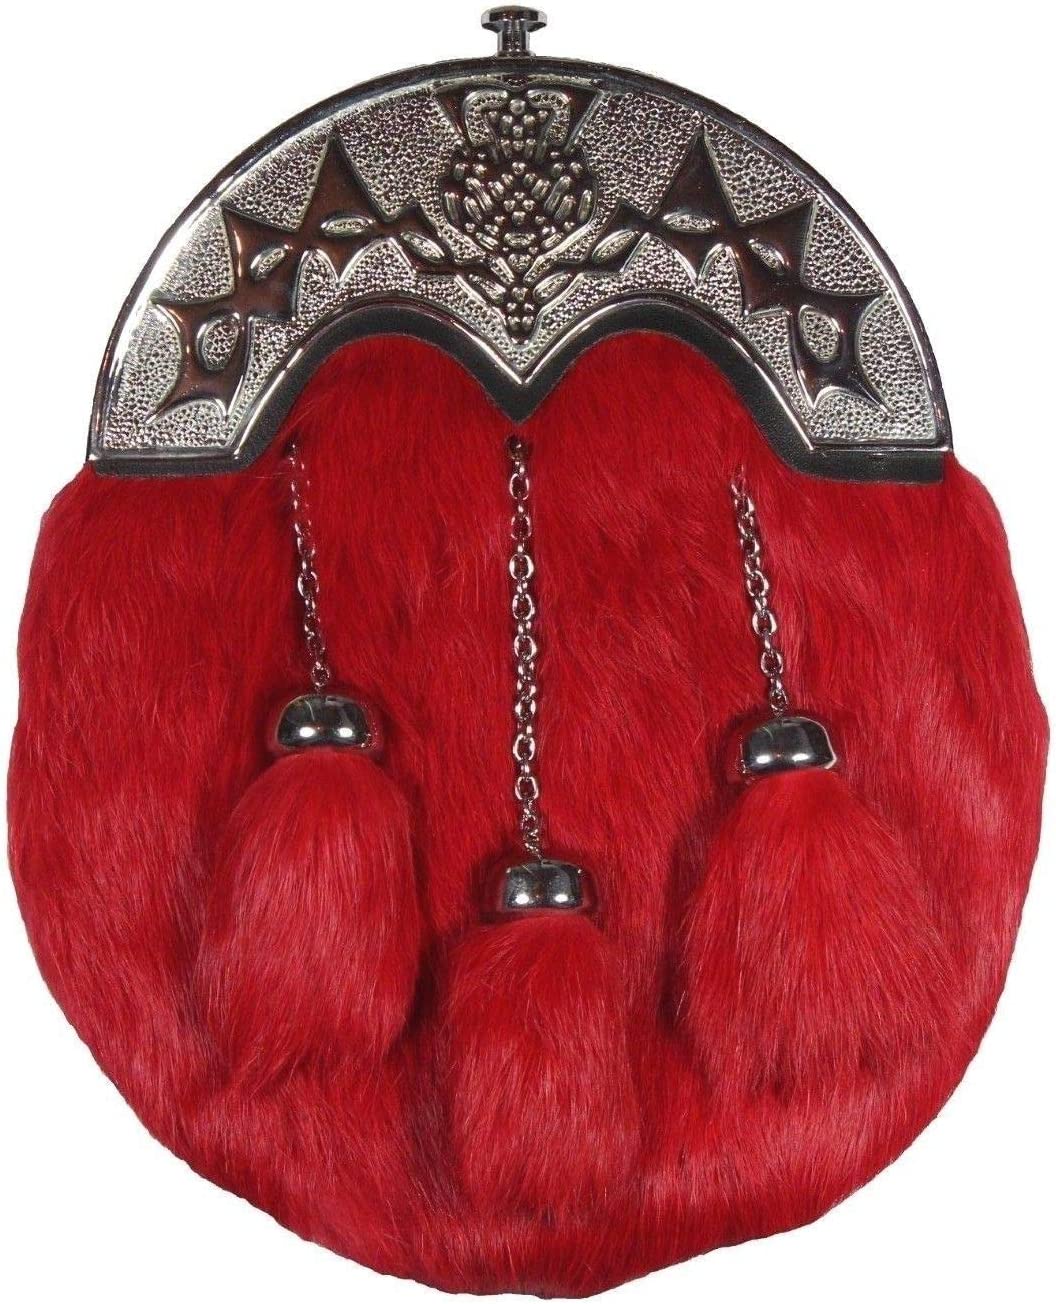 Scottish Thistle & Highland Red Sporran Full Dress Thistle Cantle With 3 Tassels Chrome Finish.